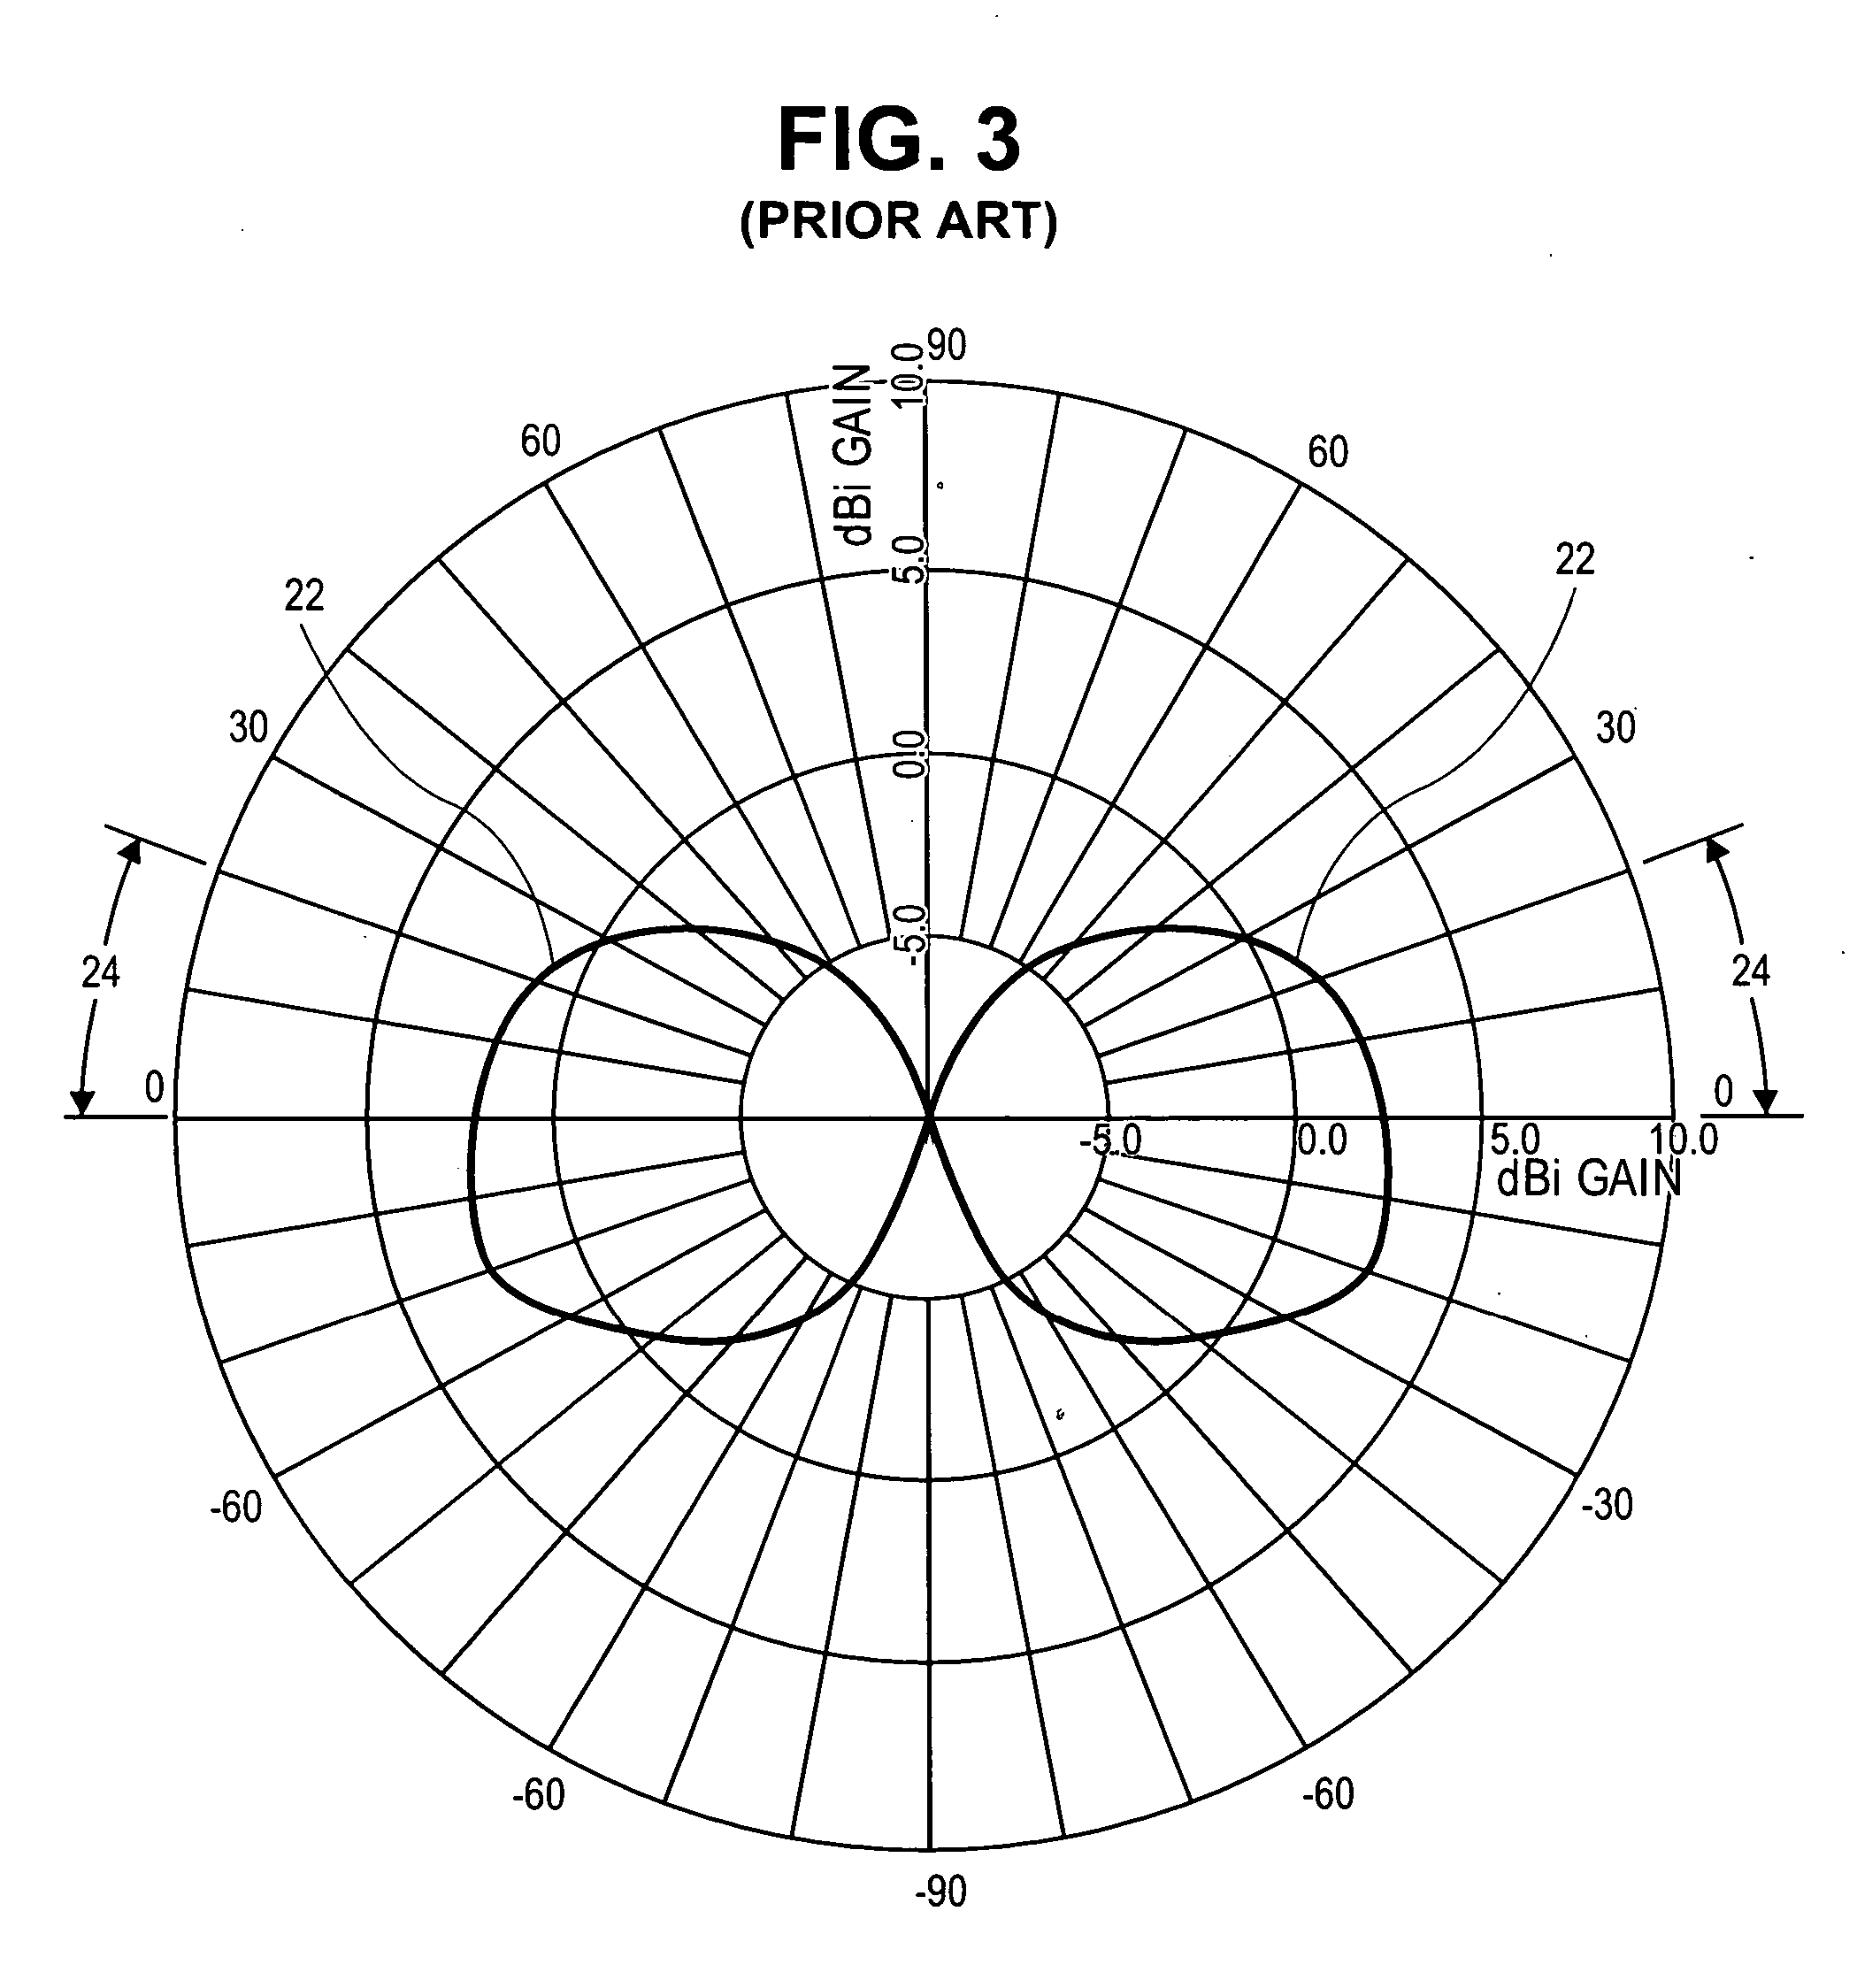 Apparatus and method for local broadcasting in the twenty-six megahertz short wave band